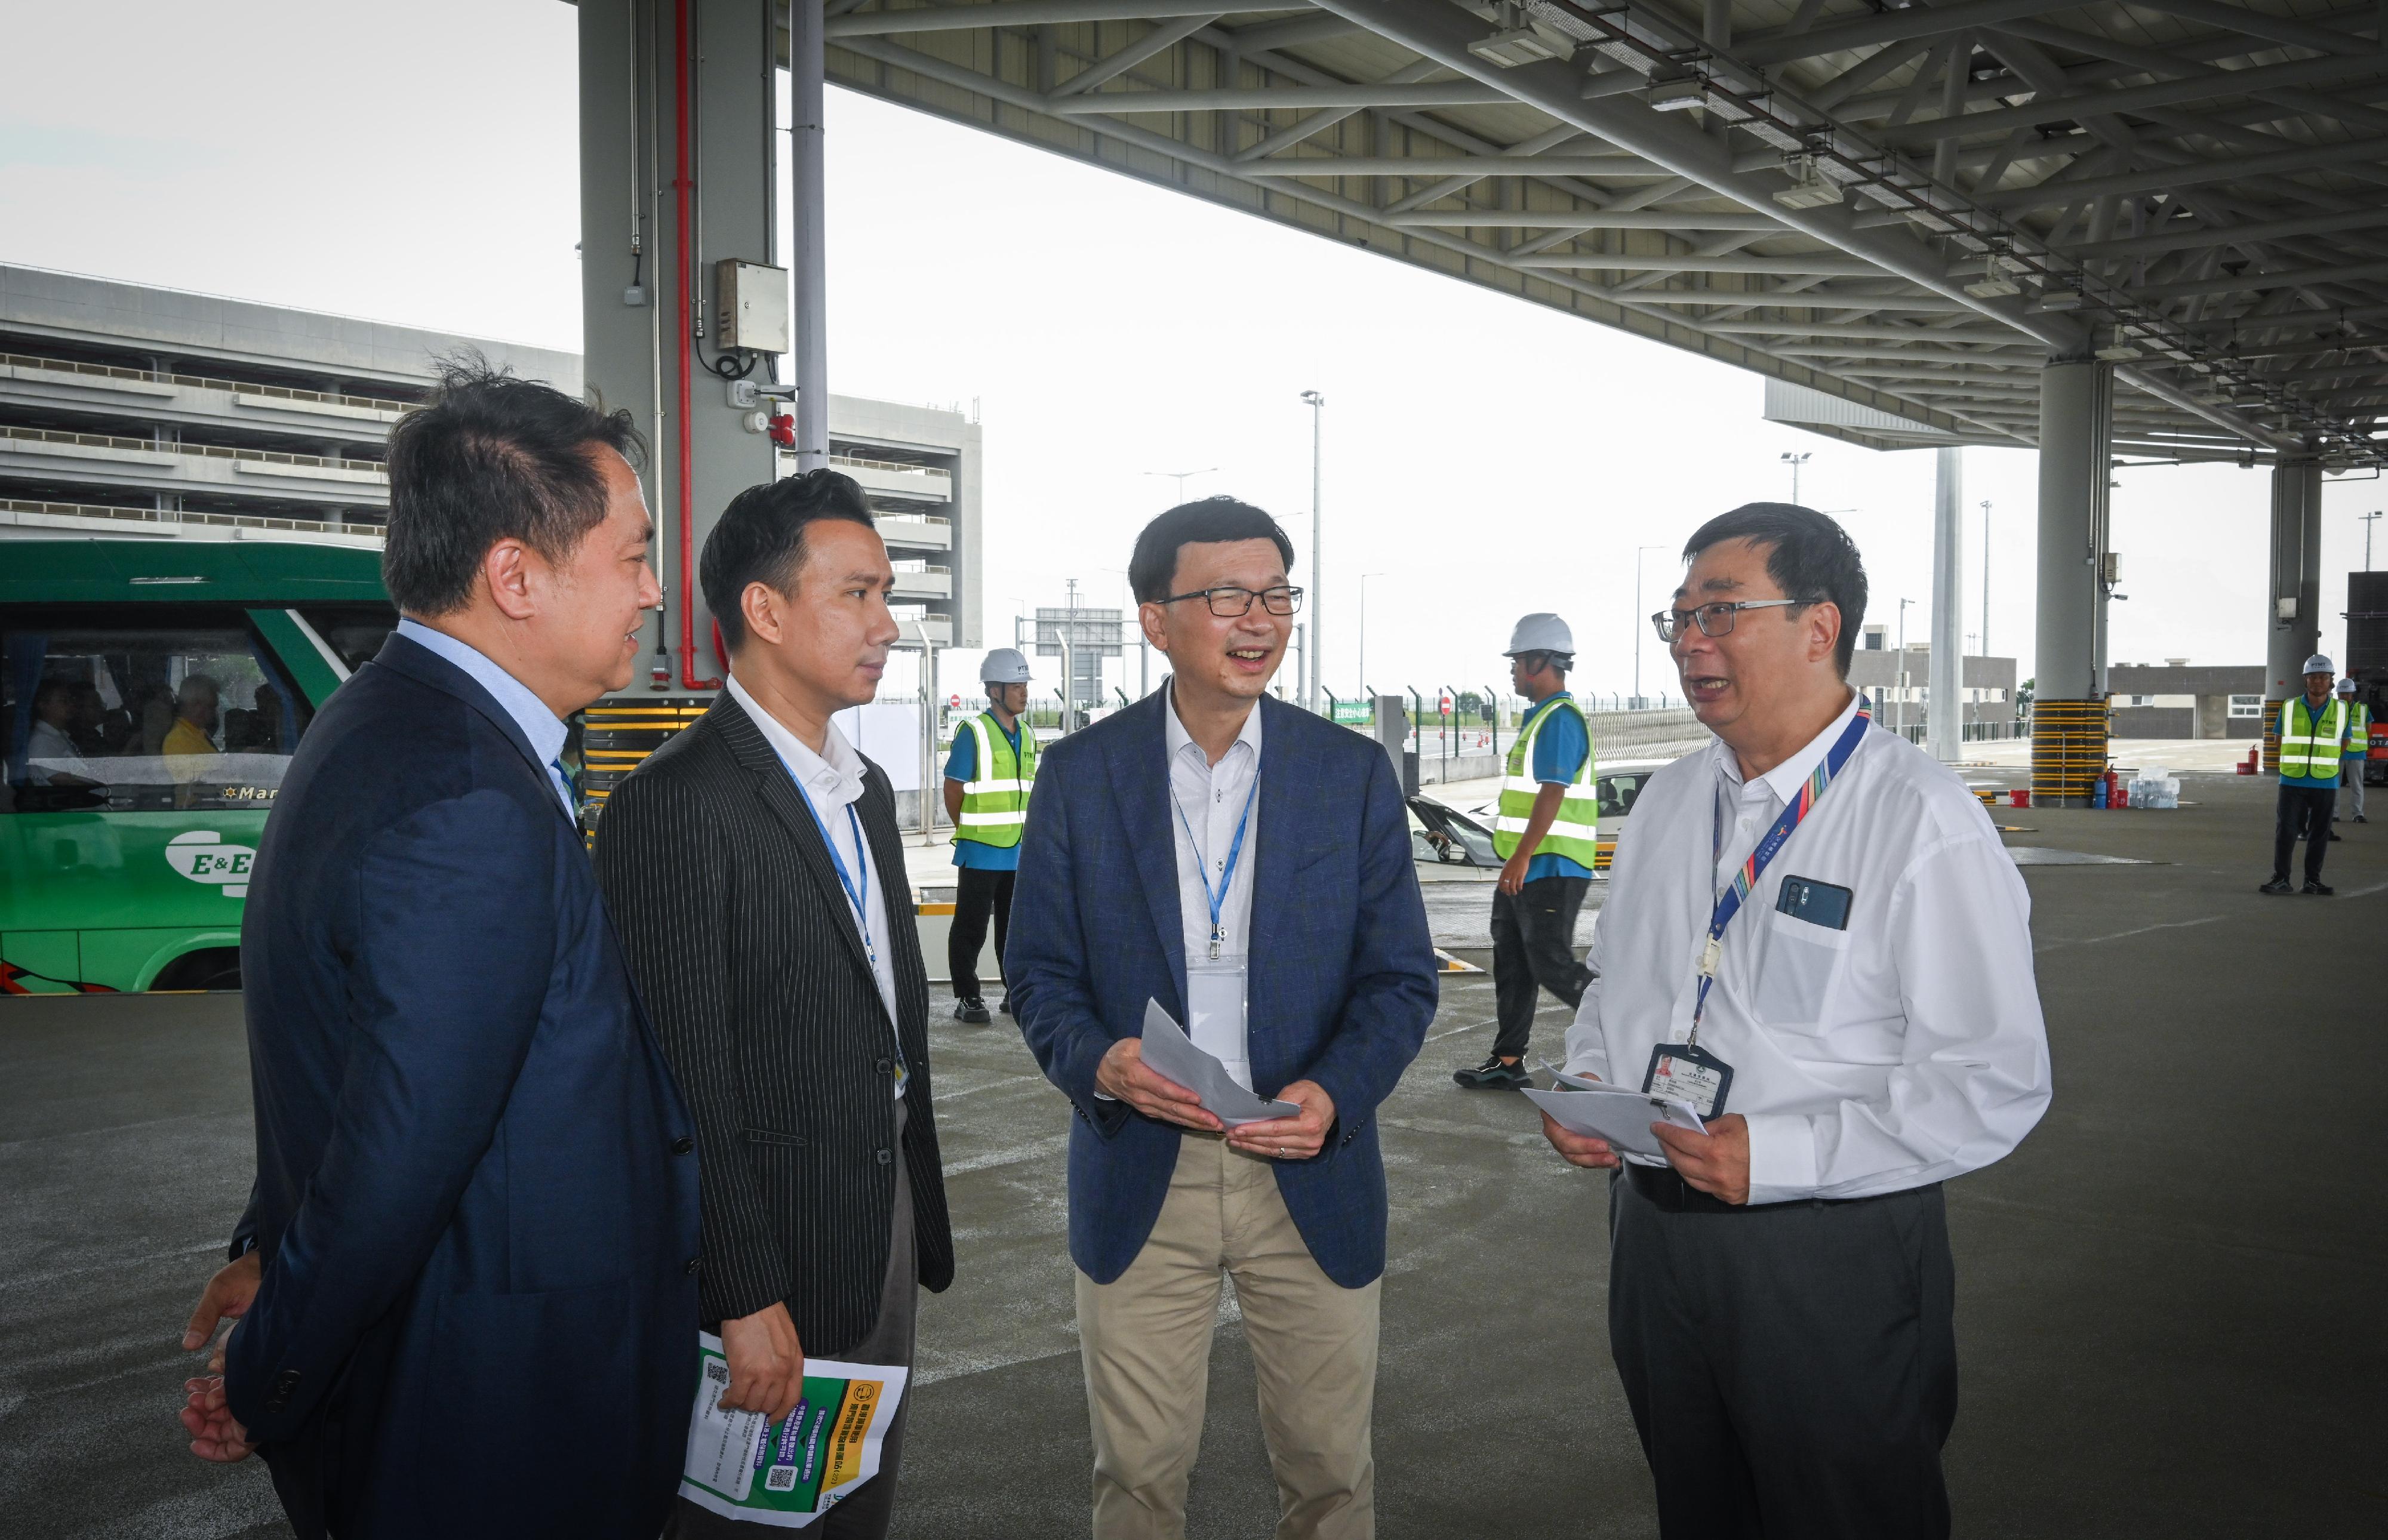 Following the discussions and agreement made between the governments of Hong Kong and Macao, the arrangement for Hong Kong-Macao cross-boundary goods vehicles using the Hong Kong-Zhuhai-Macao Bridge (HZMB) will be implemented. Photo shows the Under Secretary for Transport and Logistics, Mr Liu Chun-san (second right), and the Assistant Commissioner for Transport (New Territories), Mr Patrick Wong (first left), being briefed by the Subdirector of the Macao Transport Bureau, Mr Chiang Ngoc Vai (first right), on the HZMB Macao Port transfer facility as well as the operational procedures for Hong Kong goods vehicles travelling to Macao.